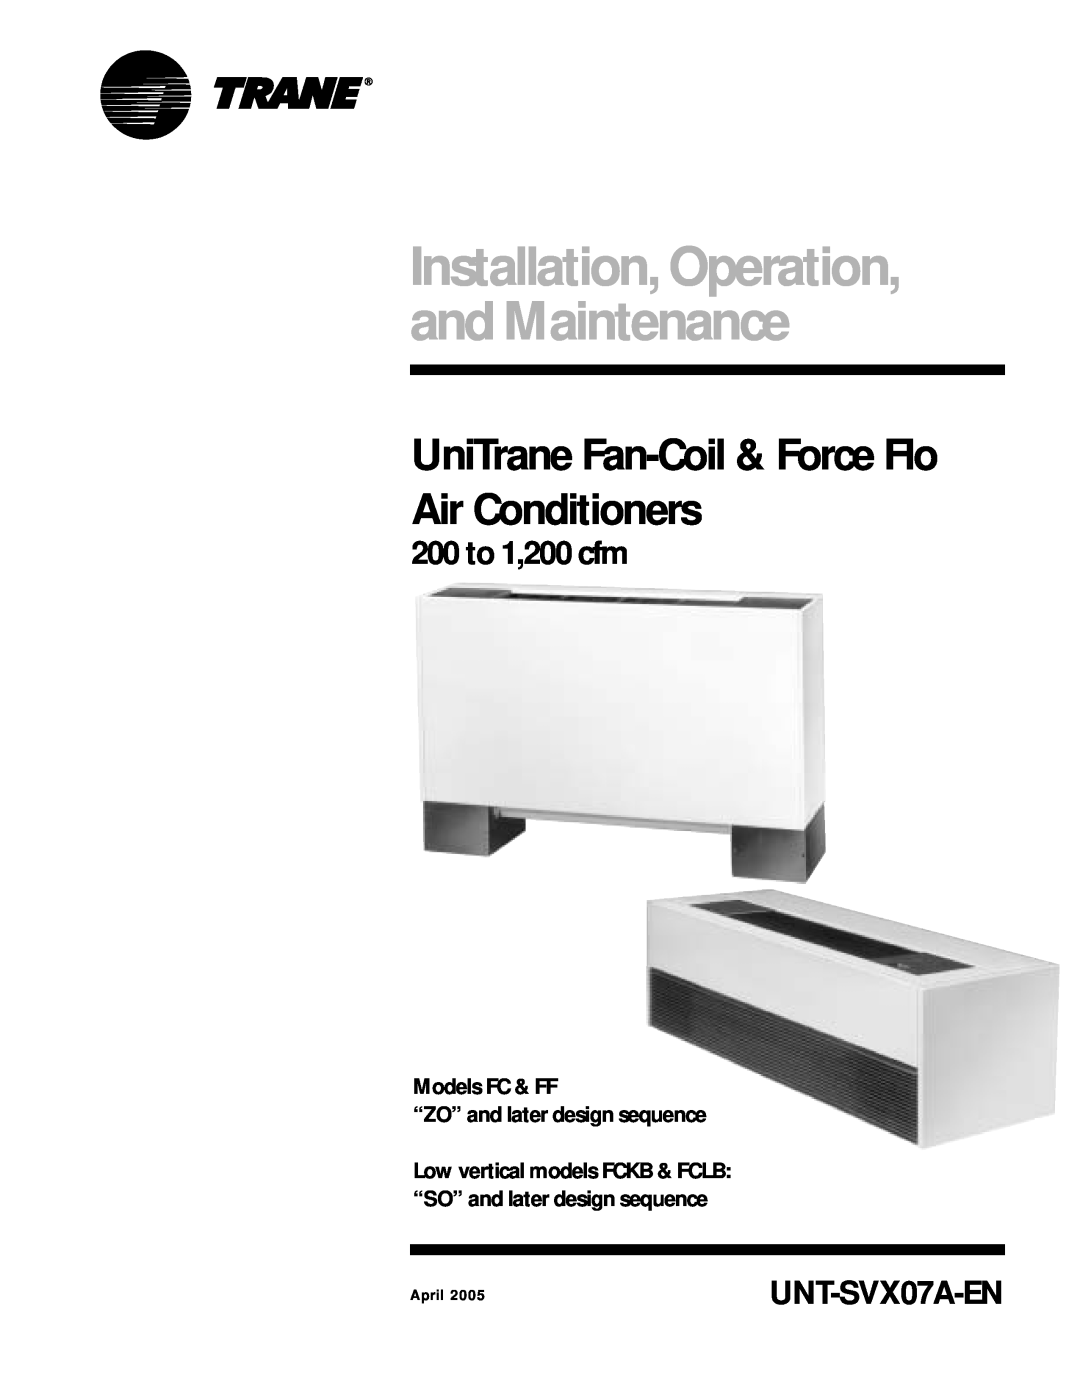 Trane UniTrane Fan-Coil & Force Flo Air Conditioners manual Models FC & FF “ZO” and later design sequence, UNT-SVX07A-EN 